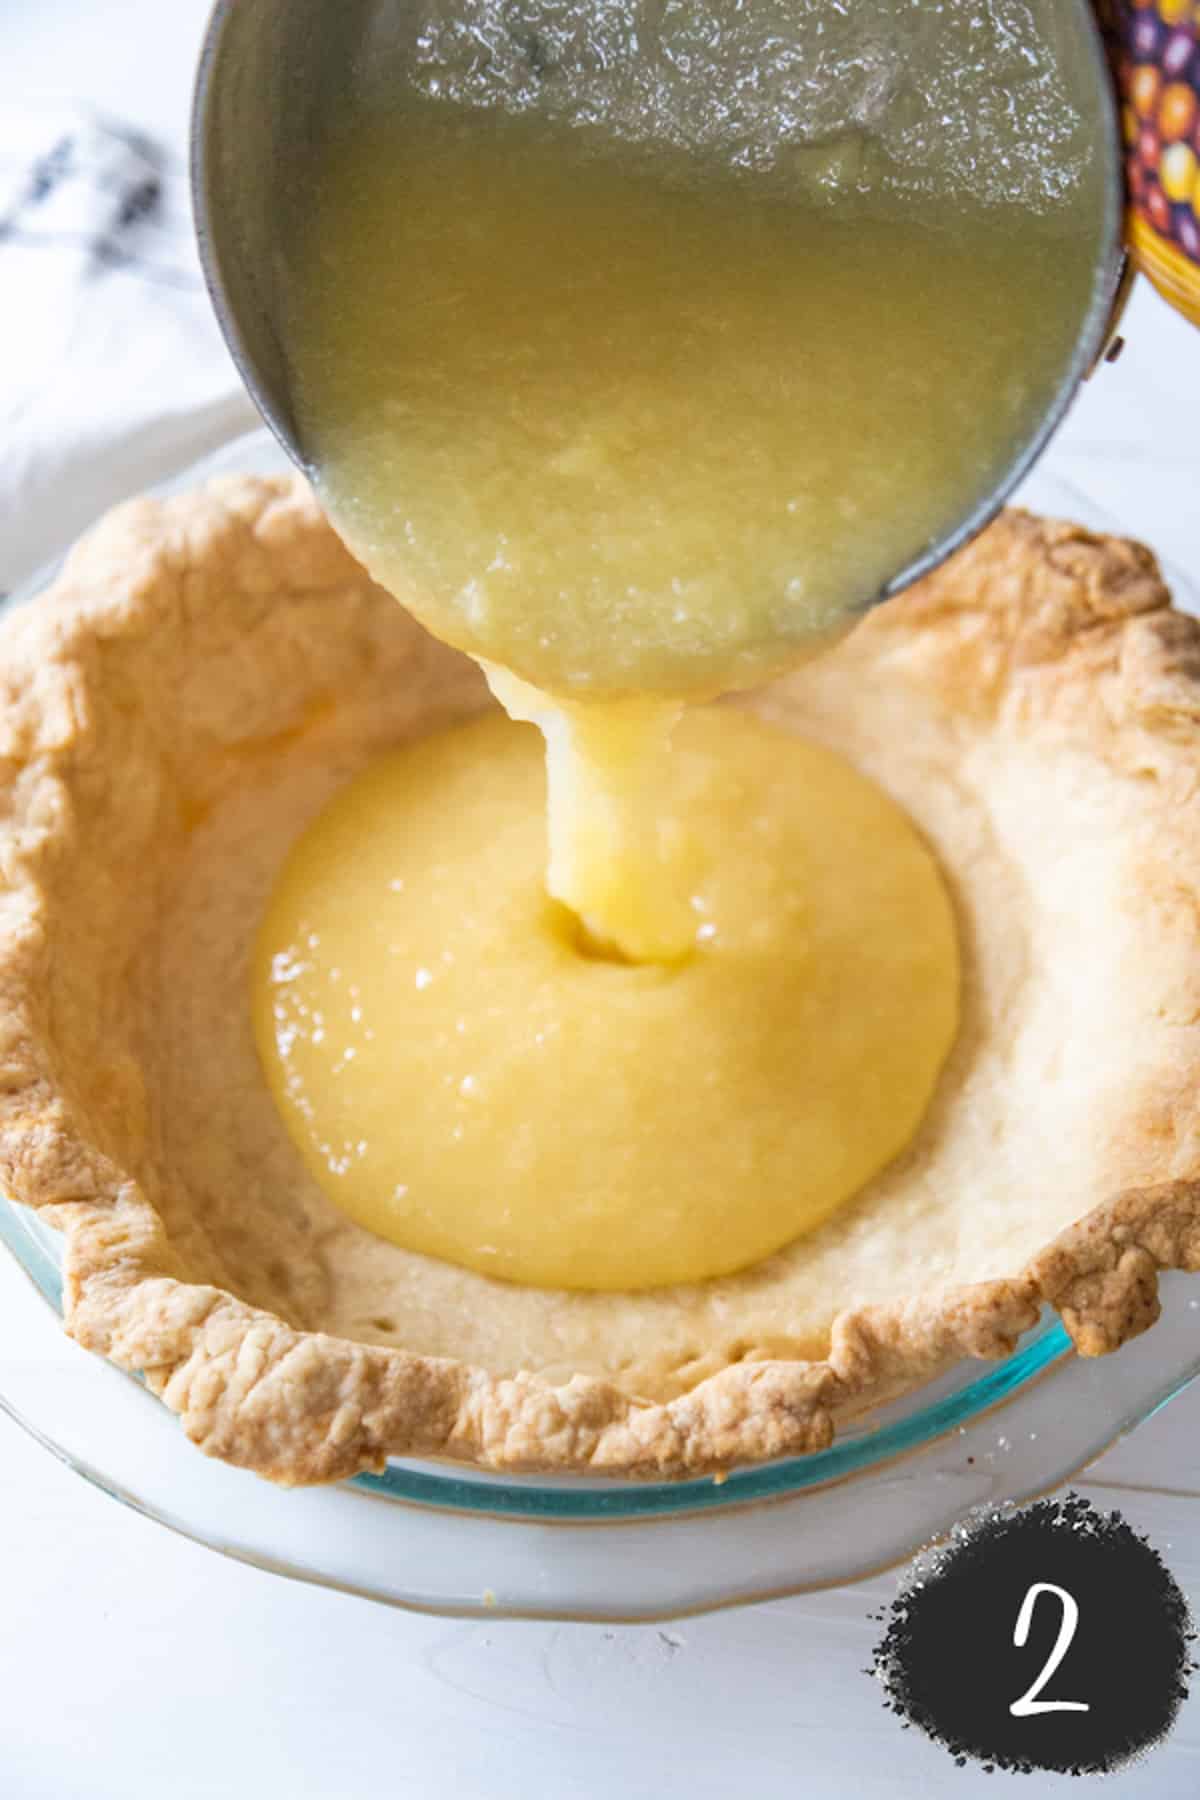 Lemon curd being poured into a baked pie crust.